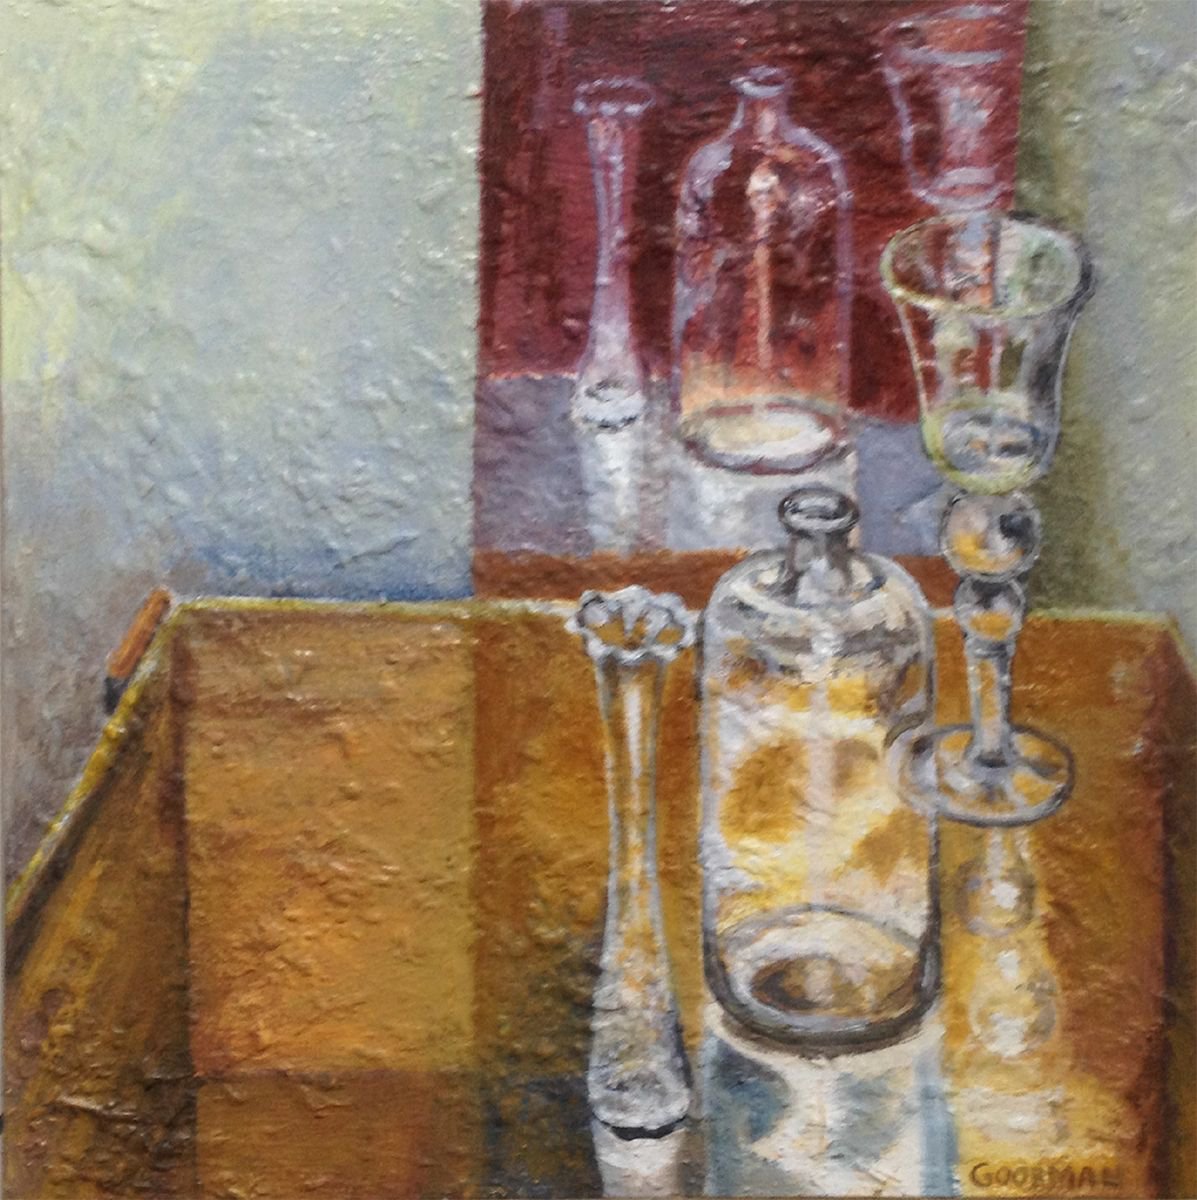 still-life with glasses and mirror by Ren Goorman